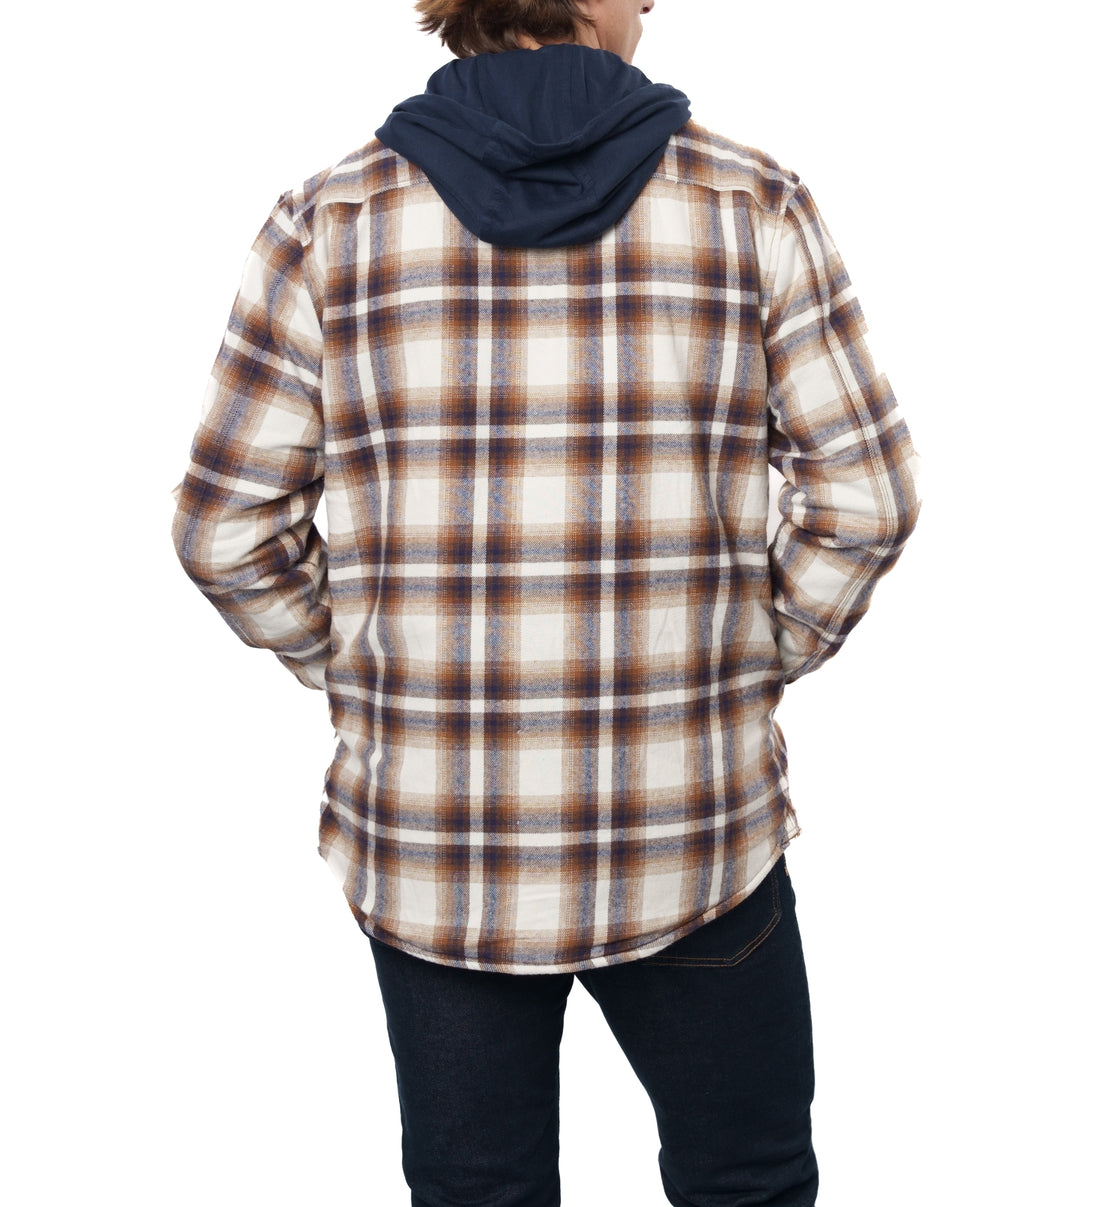 THE RANIER SHERPA LINED HOODED FLANNEL SHIRT JACKET